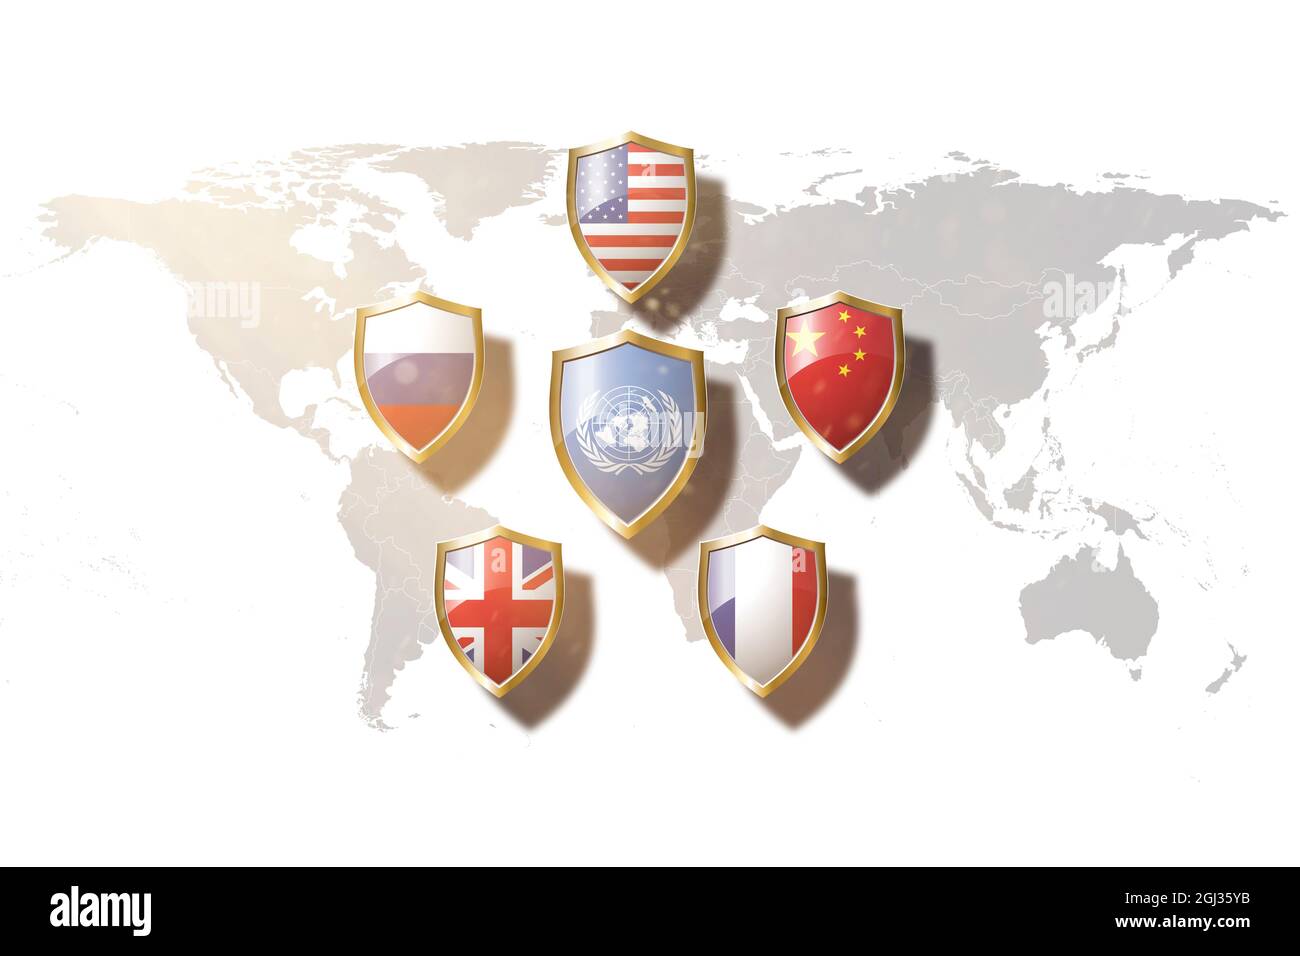 veto power countries flags in golden shield on world map background.United Nations. Stock Photo